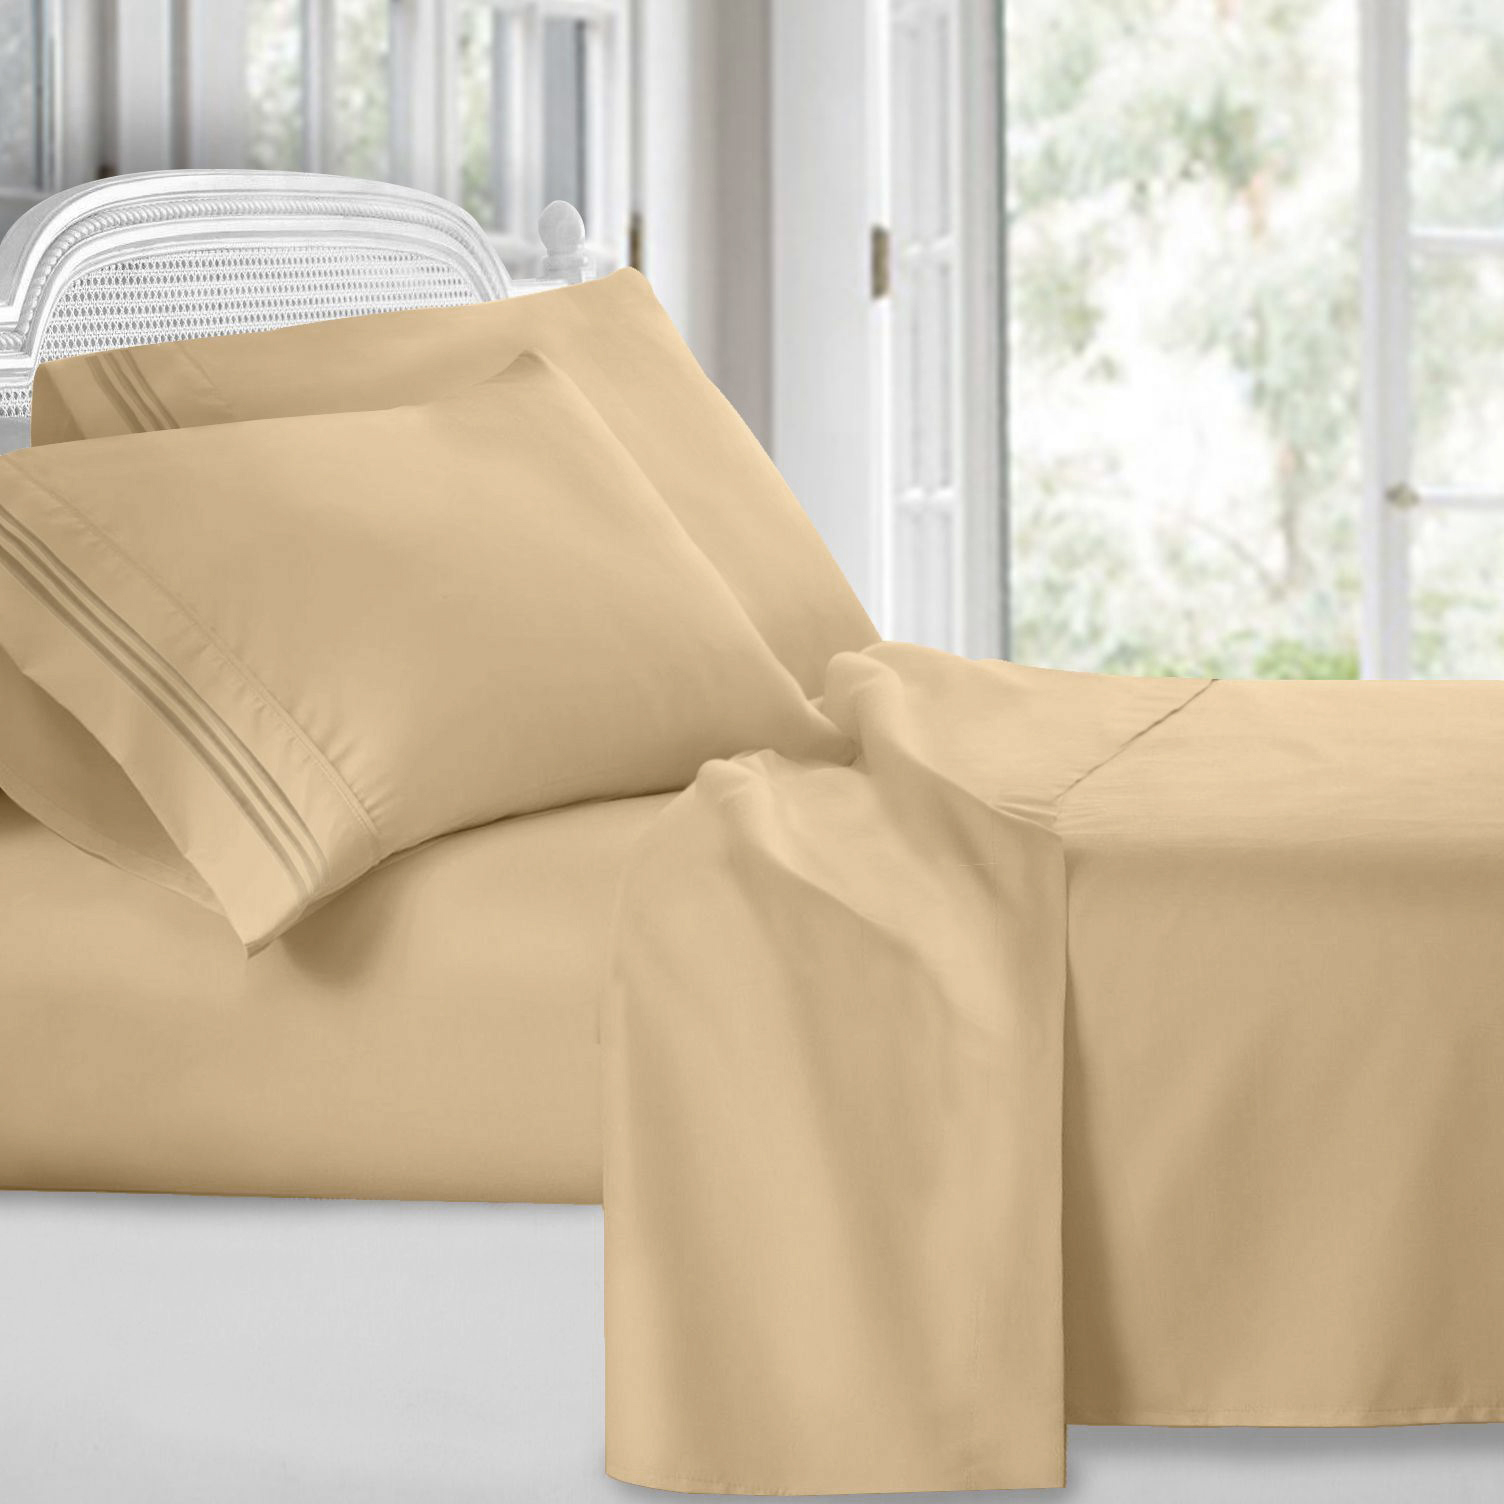 Lux Decor Collection - Ultra-soft Brushed Microfiber - 4 Piece 1800 Series Deep Pocket Bed Sheet Set - King, Taupe